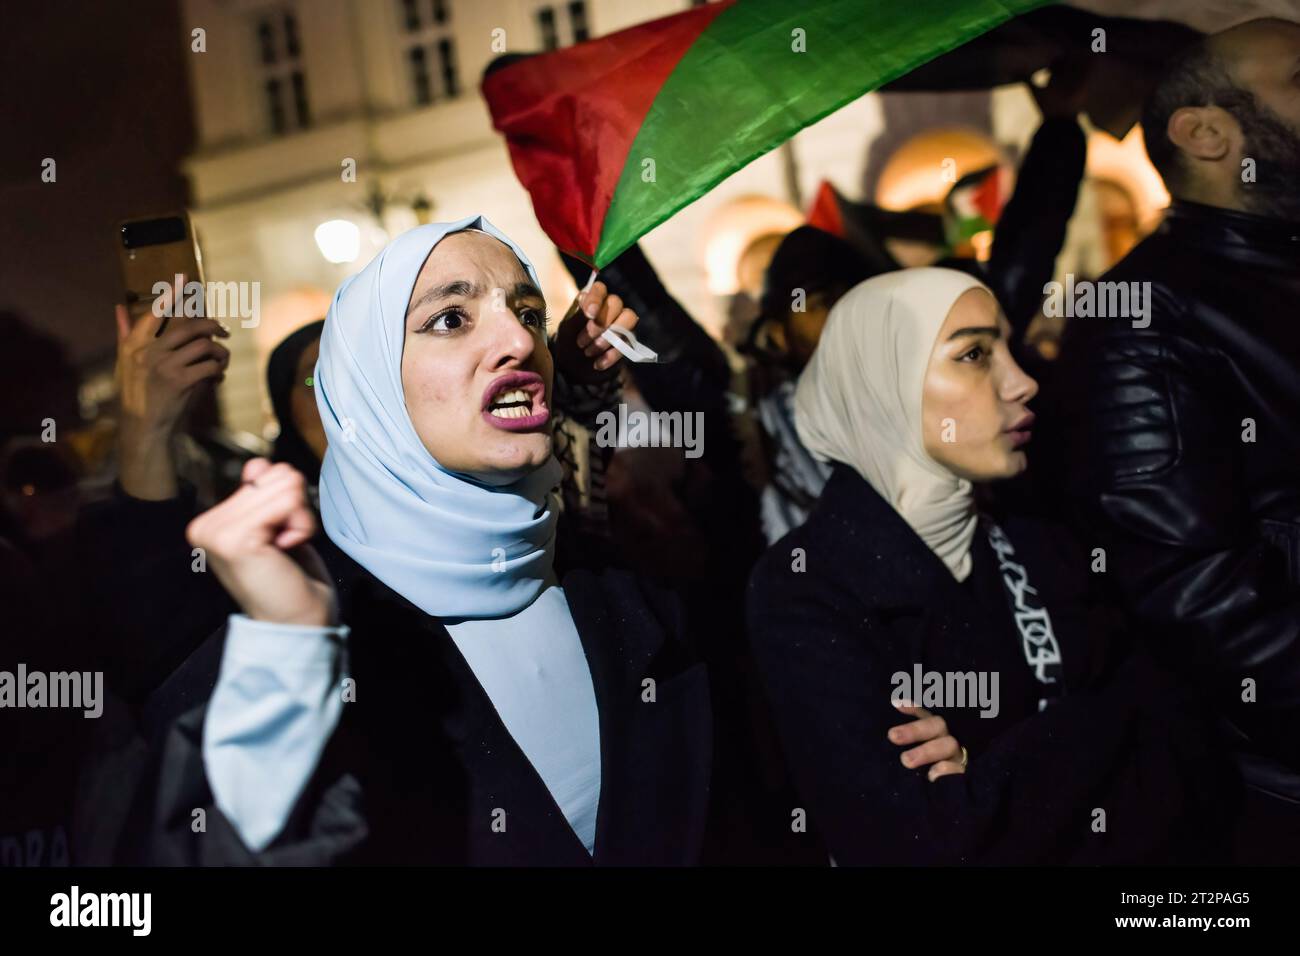 Protesters chant slogans during the pro-Palestinian rally in Warsaw. Hundreds of people - among them Palestinians - gathered in pouring rain in Warsaw's center to protest under the slogan 'Stop ethnic cleansing in Gaza'. The pro-Palestinian demonstrators demand end of bombing civilian targets in Gaza by Israel, open the humanitarian corridors and provide food, water and medicine to the inhabitants of the Gaza Strip. Protesters chanted slogans like 'Free Palestine' or 'Israel is a terrorist state'. (Photo by Attila Husejnow/SOPA Images/Sipa USA) Stock Photo